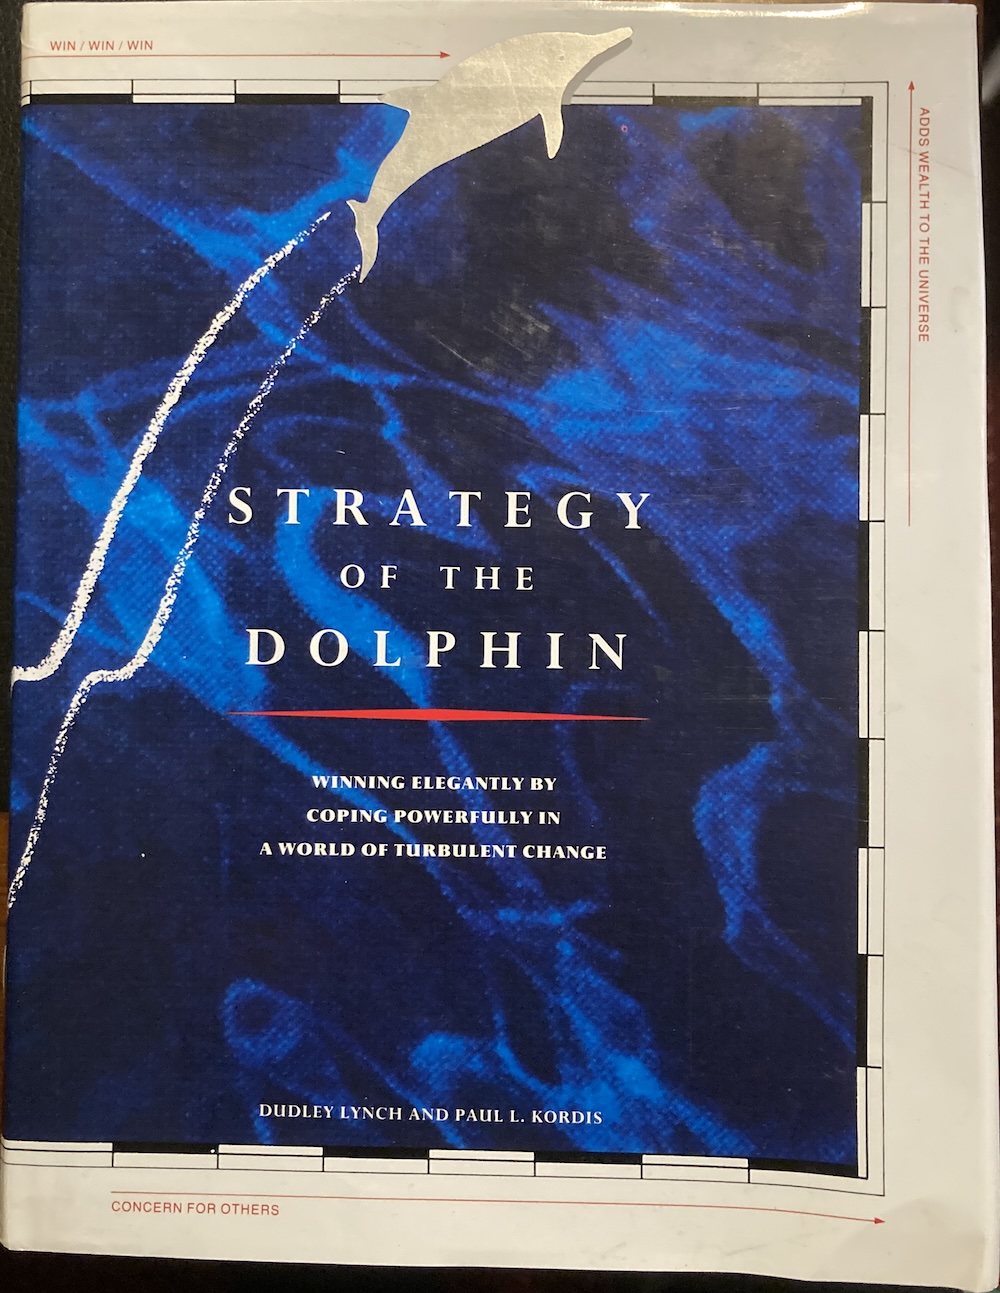 The Strategy of the Dolphin Winning Elegantly by Coping Powerfully in a World of Turbulent Change Dudley Lynch Paul L Kordis